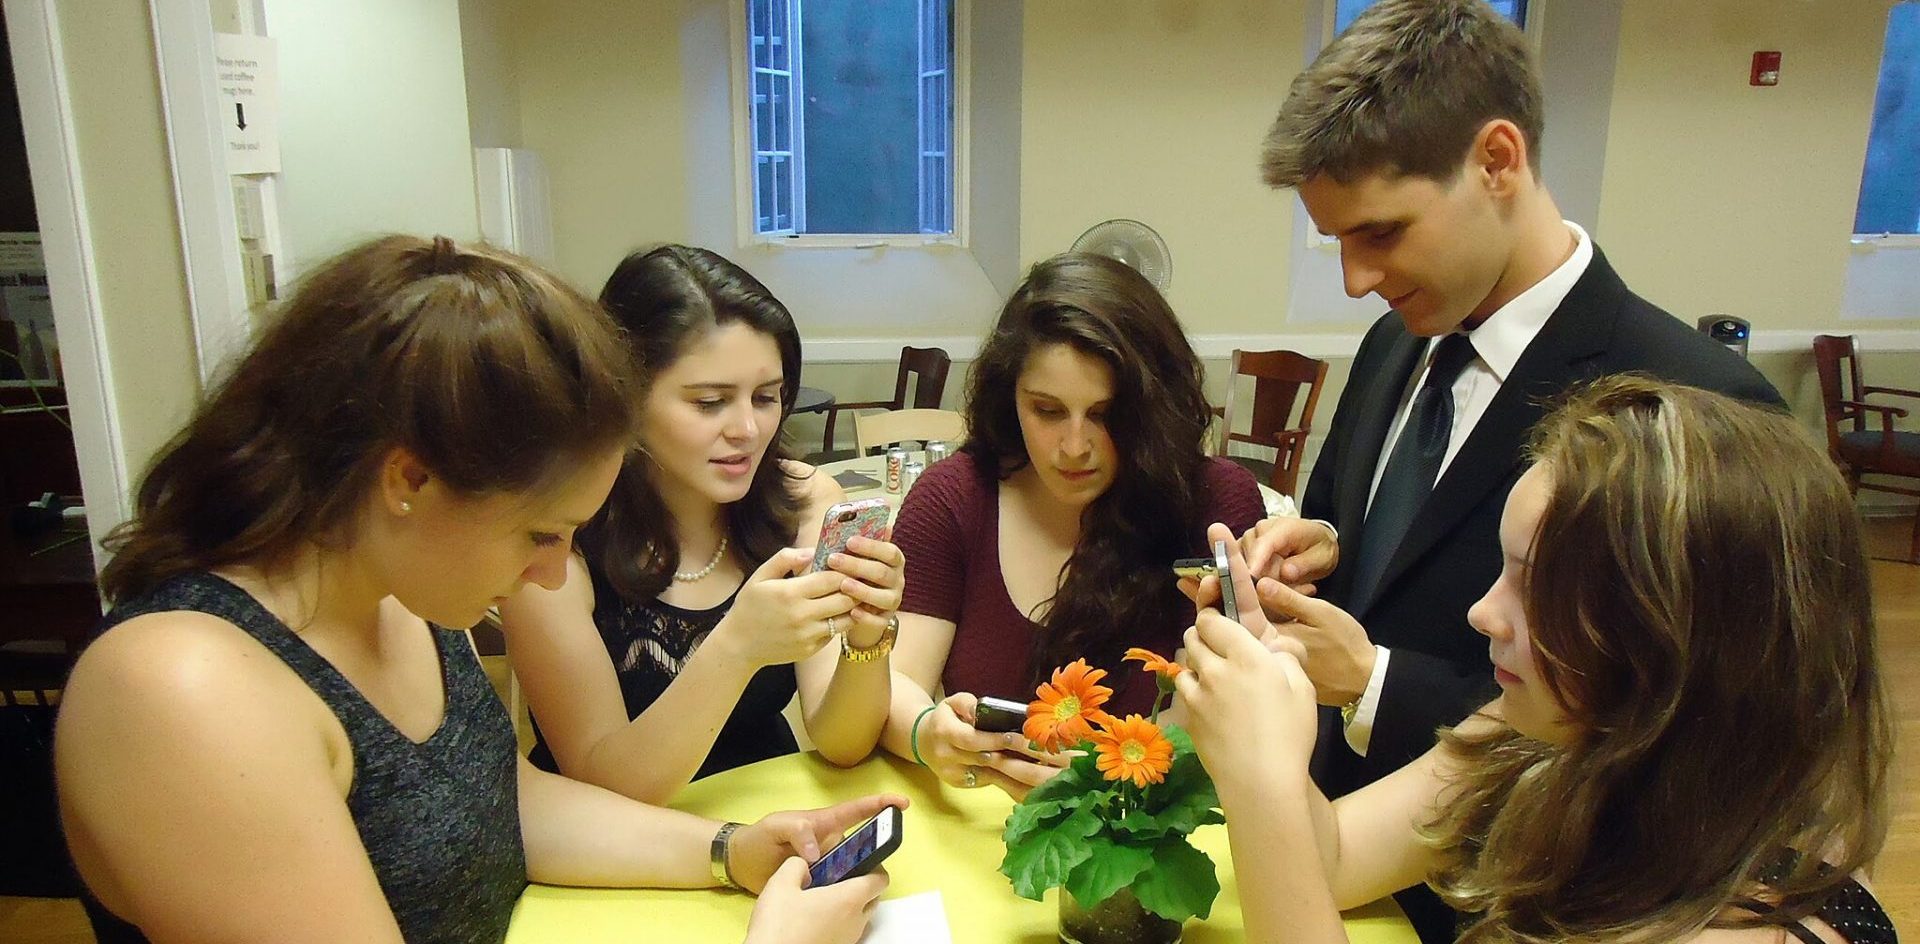 Young people at a party using their smartphones. Publishers are increasingly looking to young, mobile audiences for subscription growth. Image by Tomwsulcer, CC0, via Wikimedia Commons